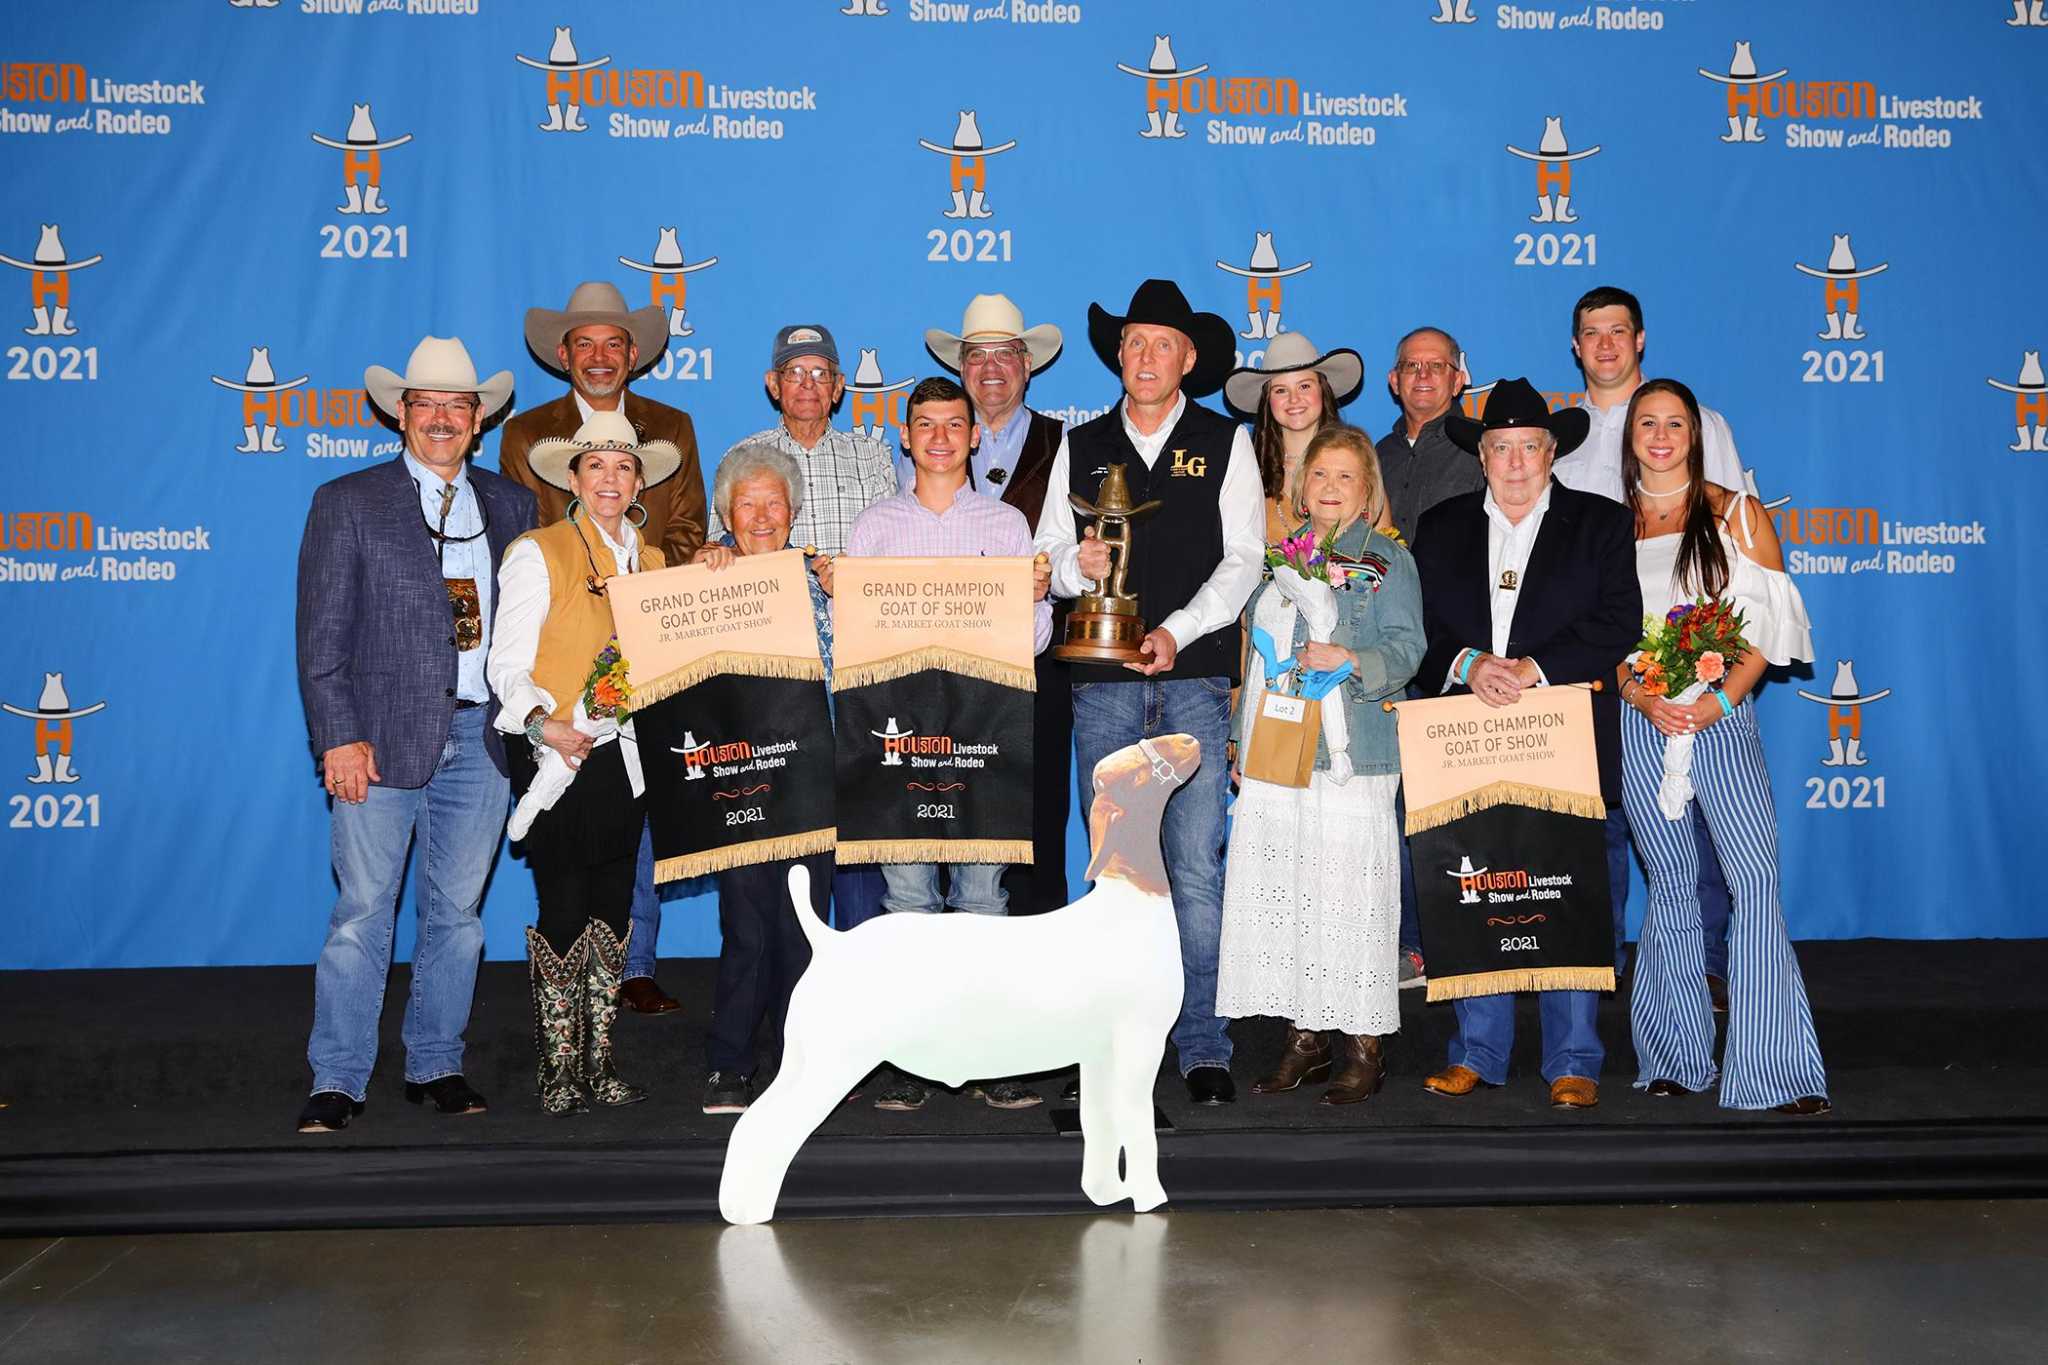 Goat sells for record 185,000 at Houston Livestock Show and Rodeo